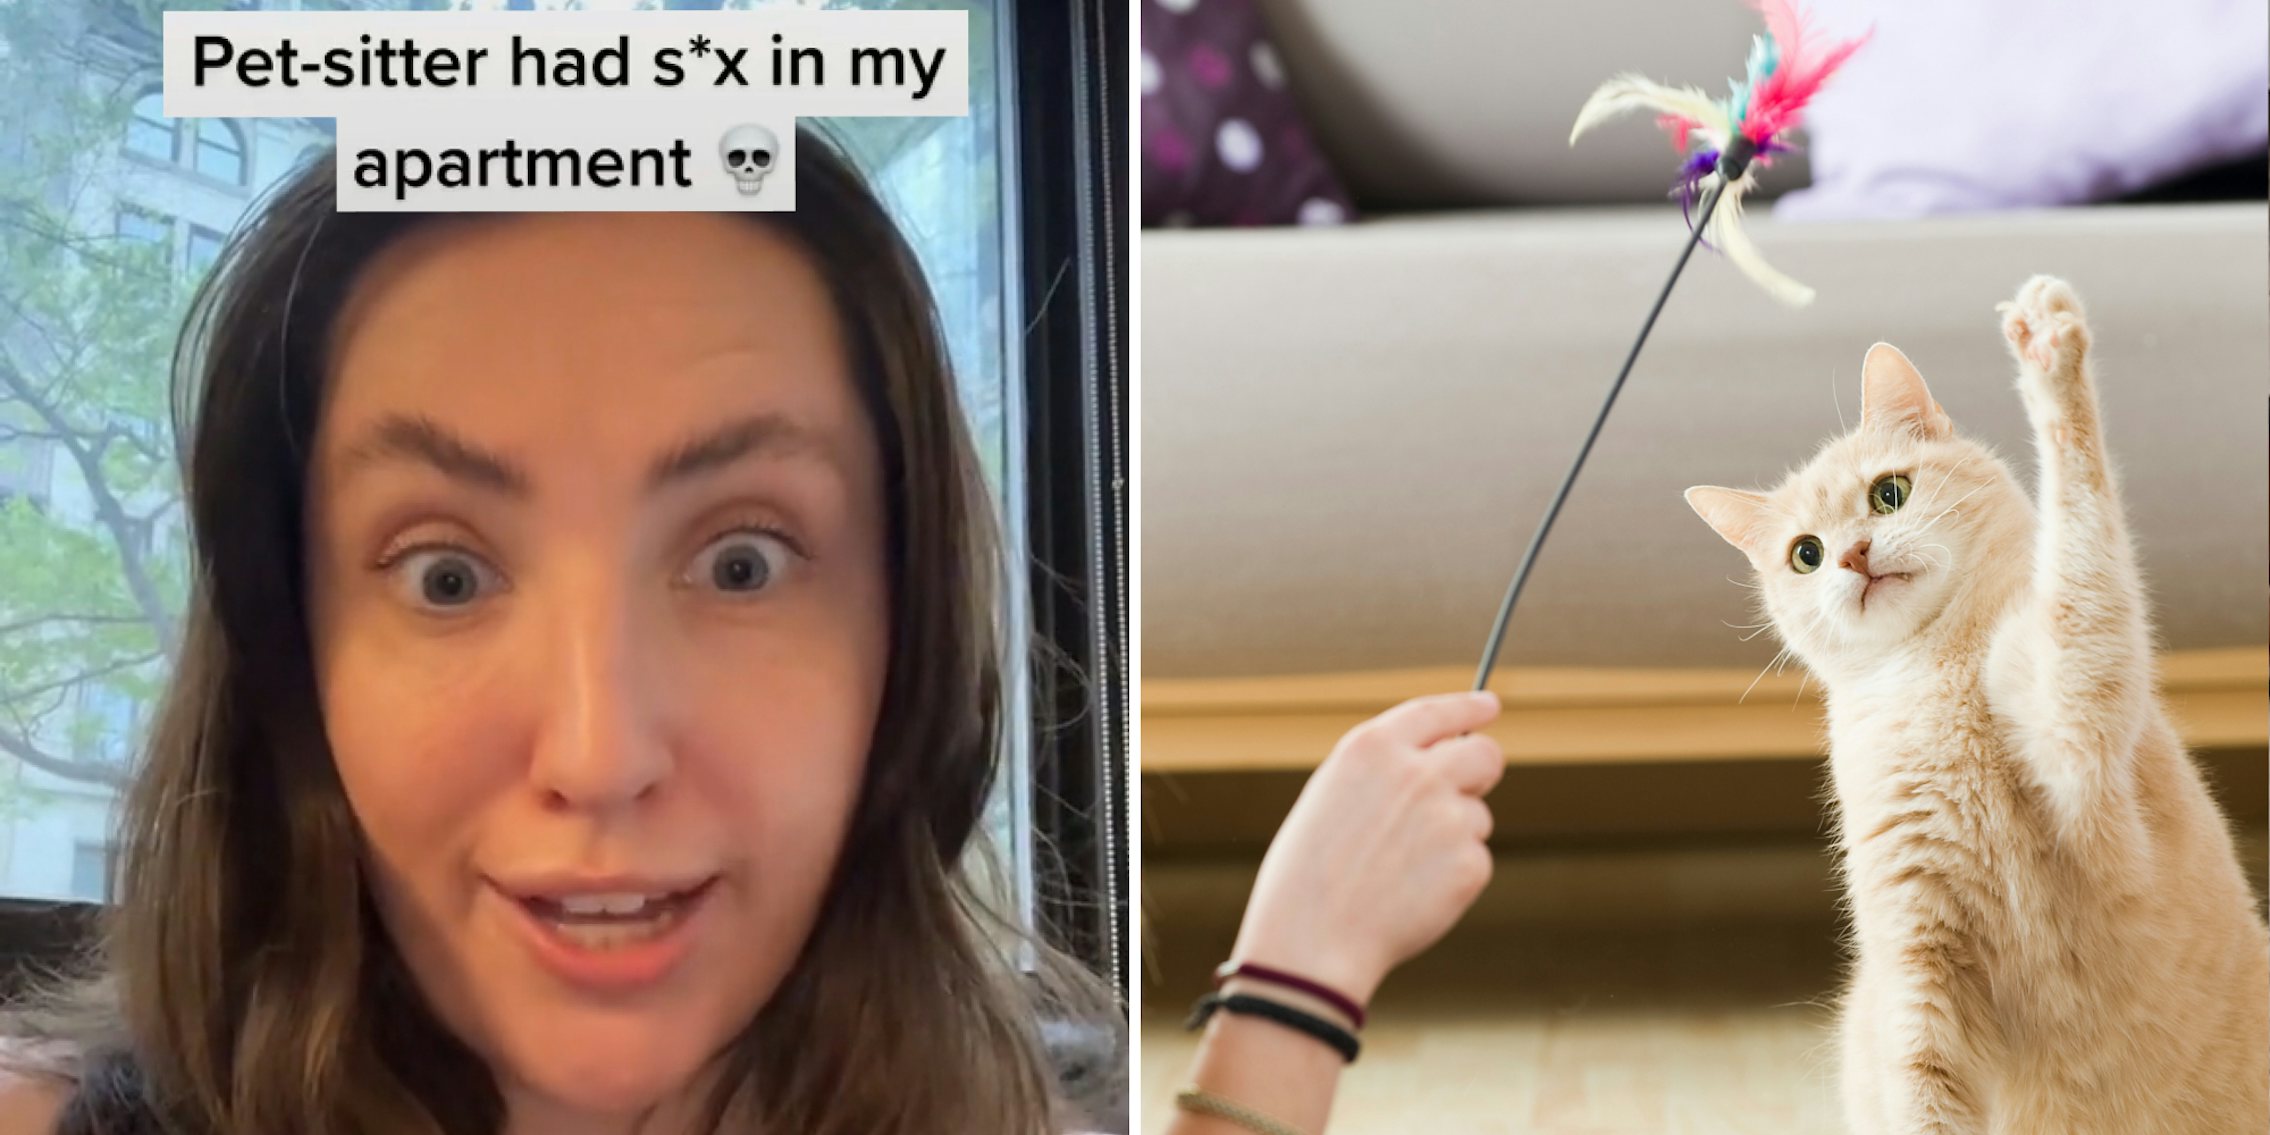 Woman shocked face caption 'Pet-sitter had s3x in my apartment' (l) hand holding cat toy playing with cat in Livingroom (r)